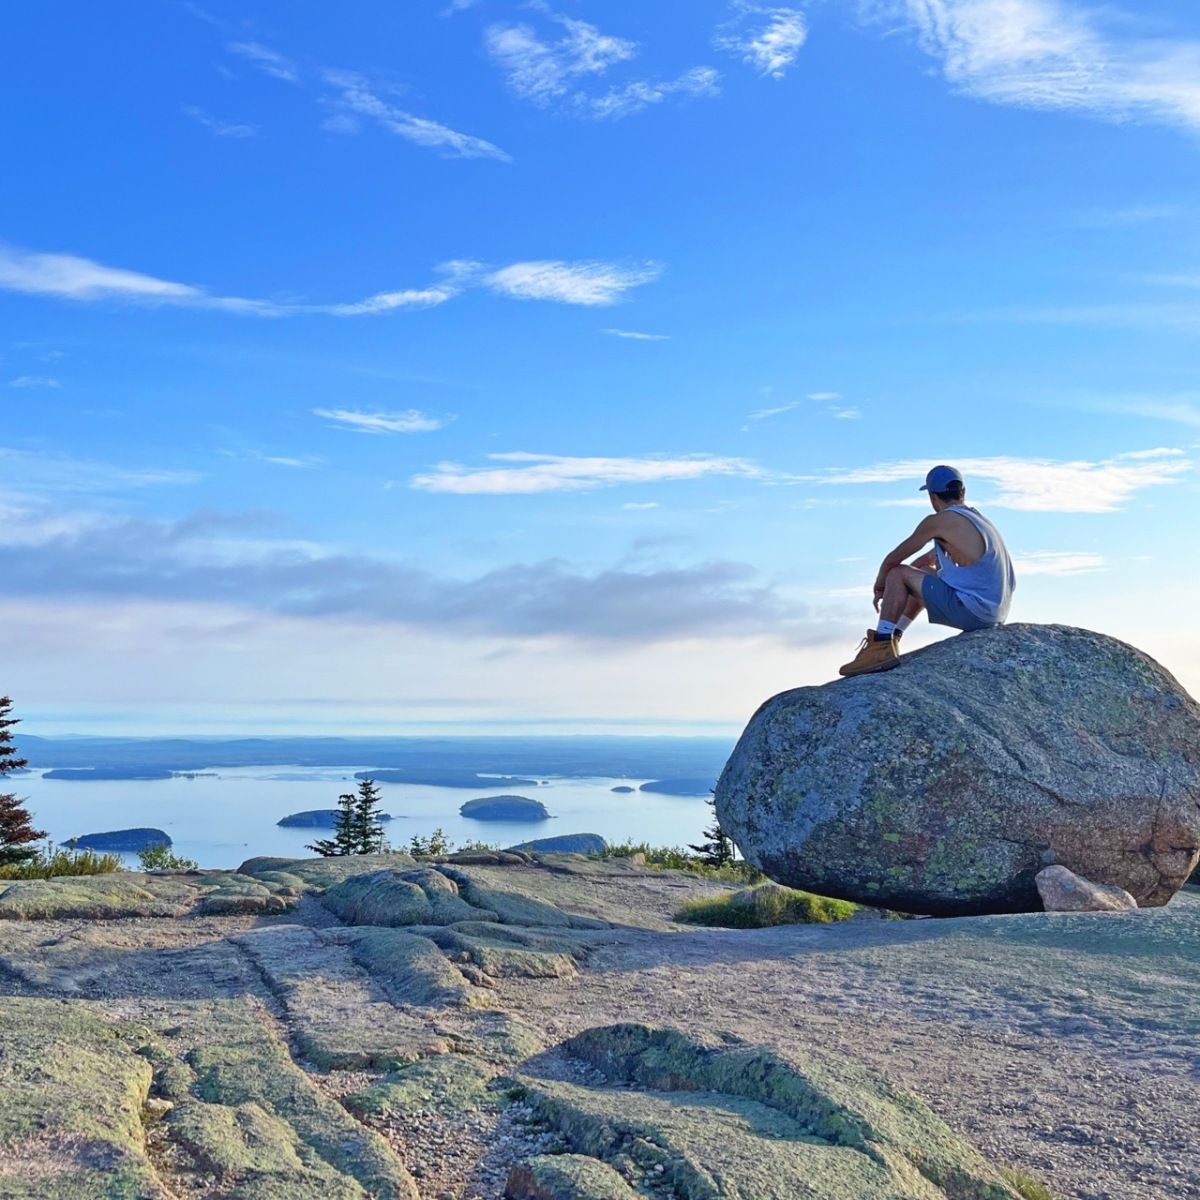 Top 10 things to do in Acadia National Park